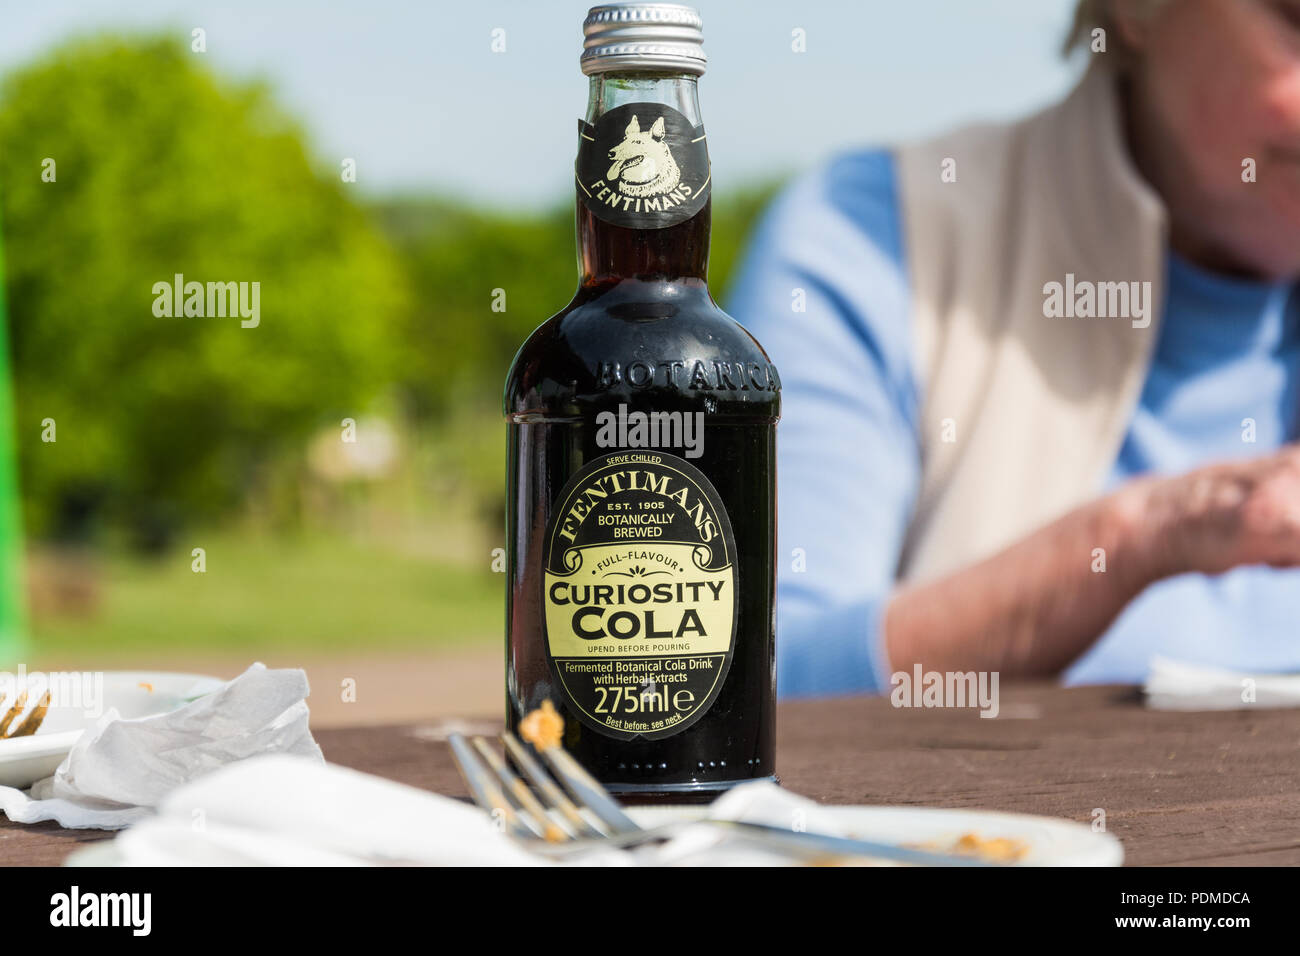 A Bottle Of Fentimans Curiosity Cola On A Picnic Table Stock Photo Alamy